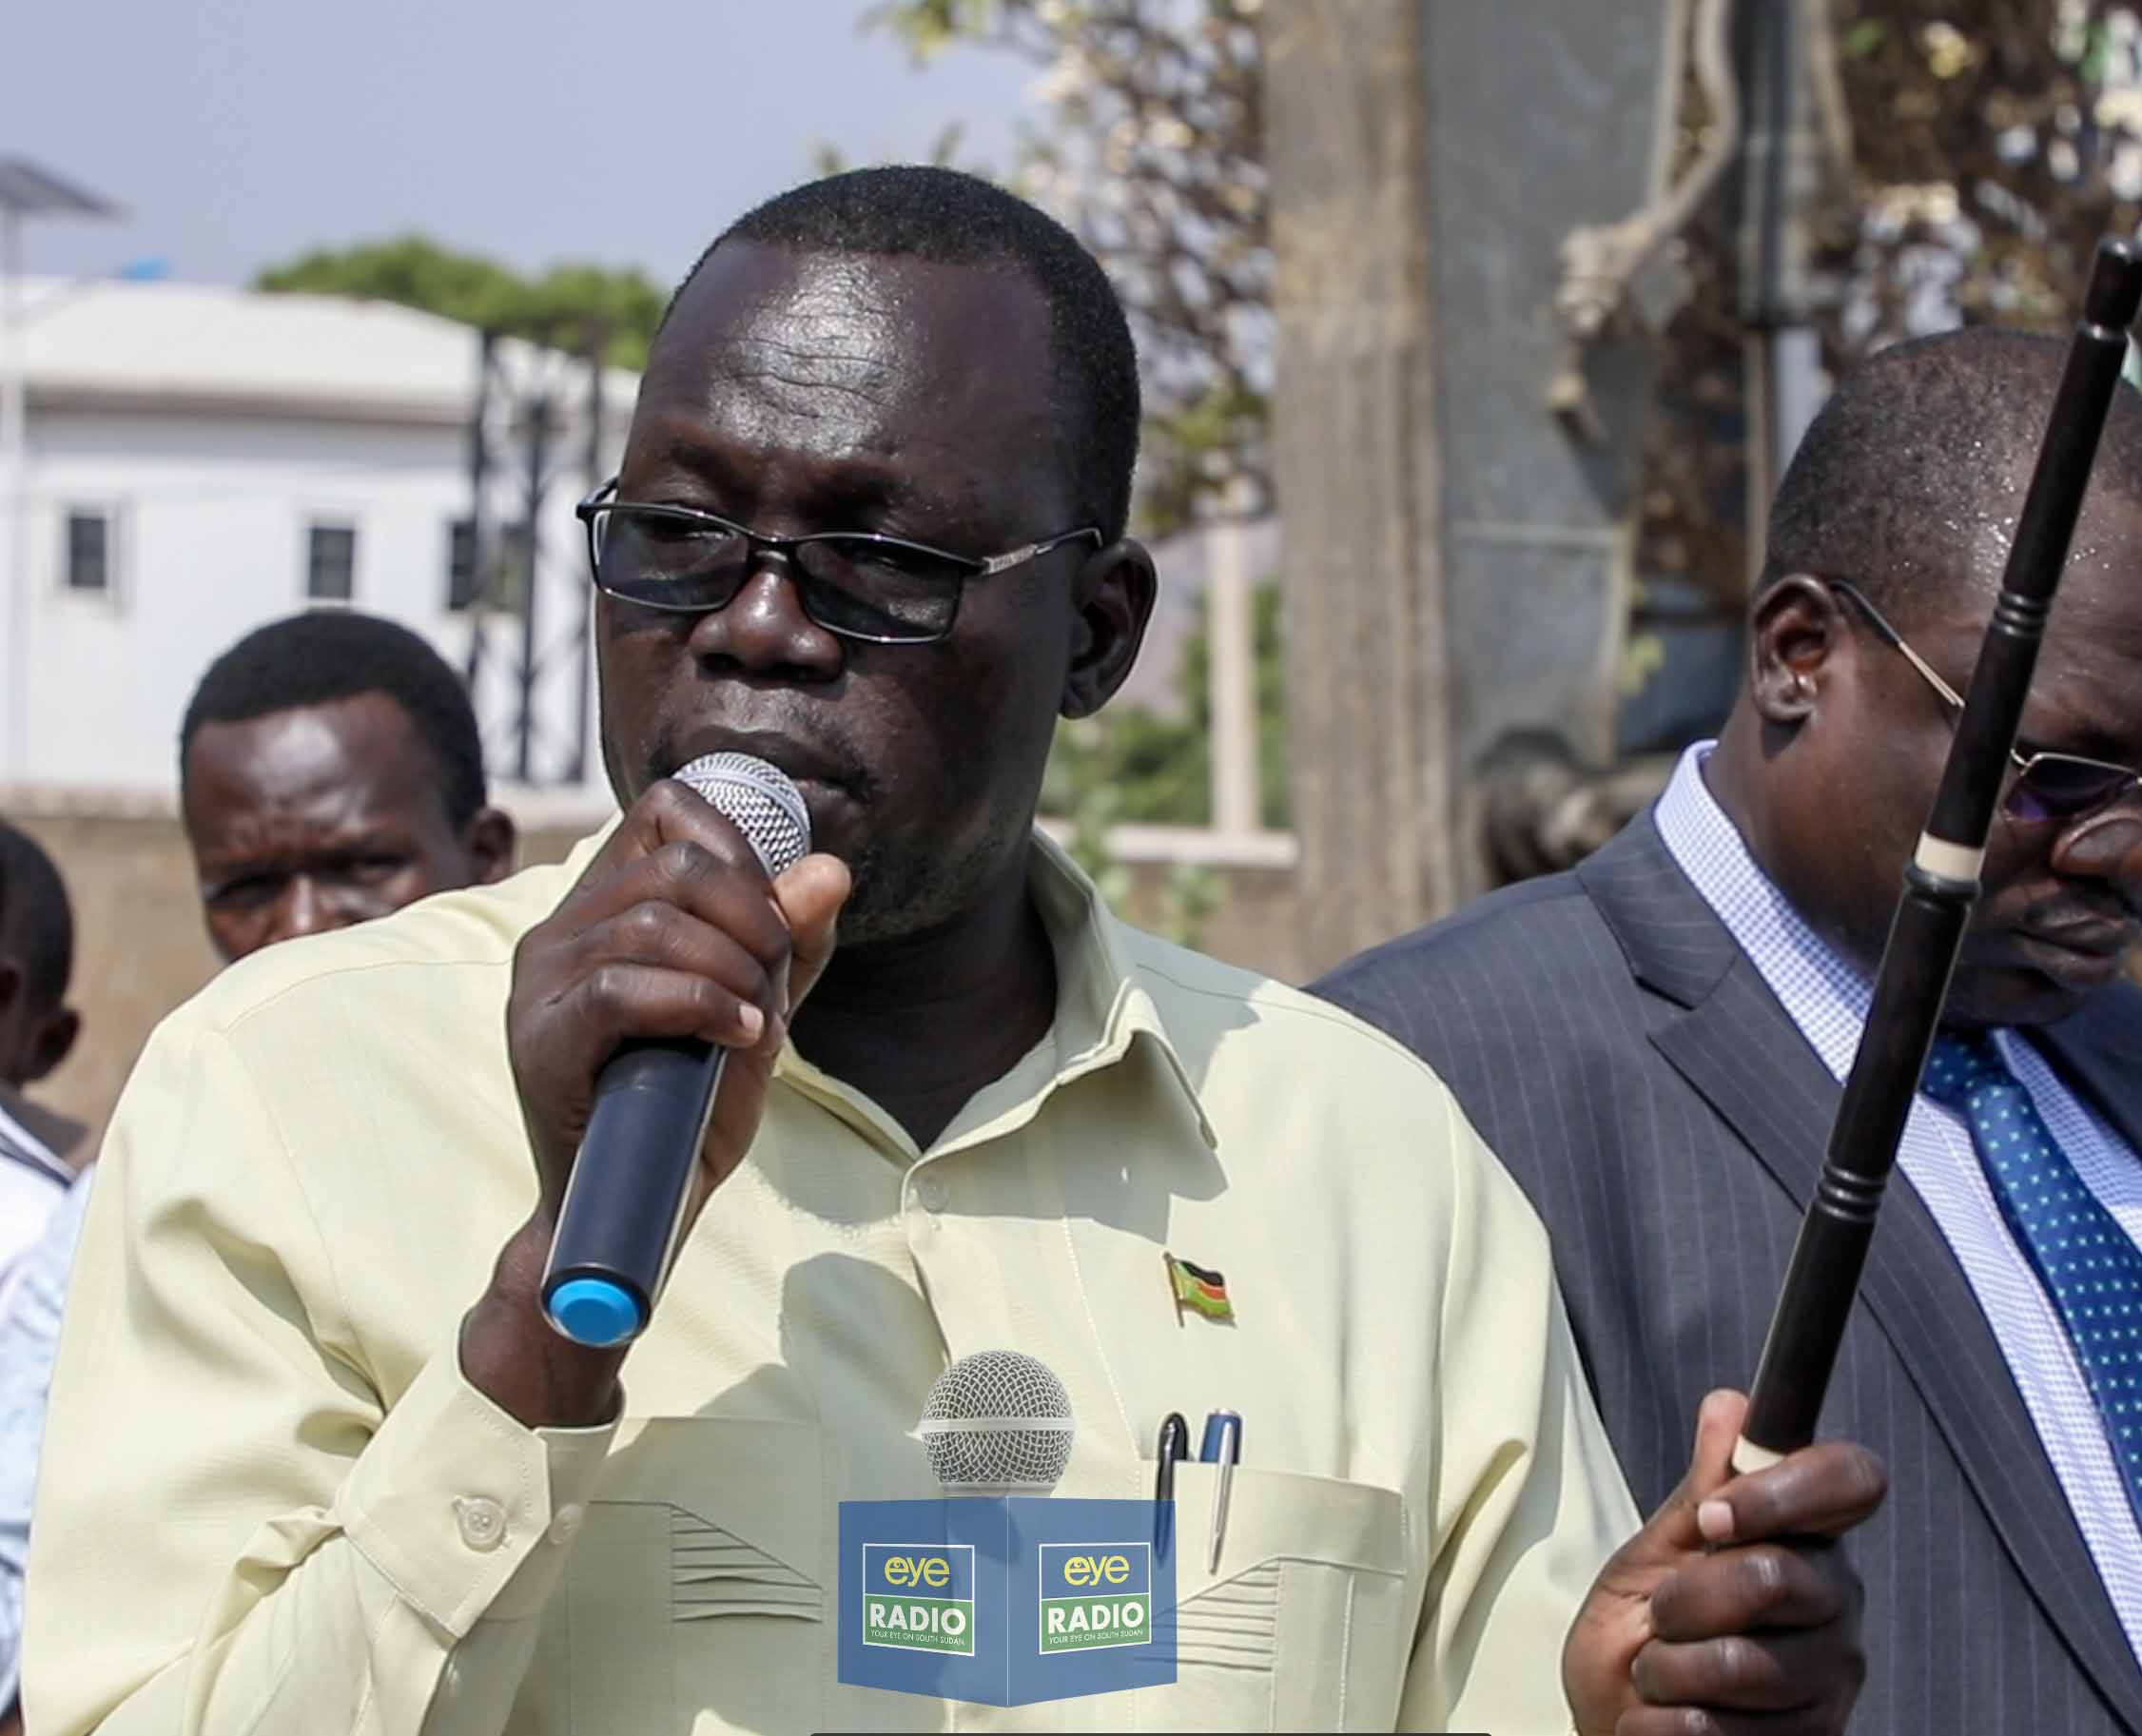 Juba Mayor asks traders not to increase prices during festivities